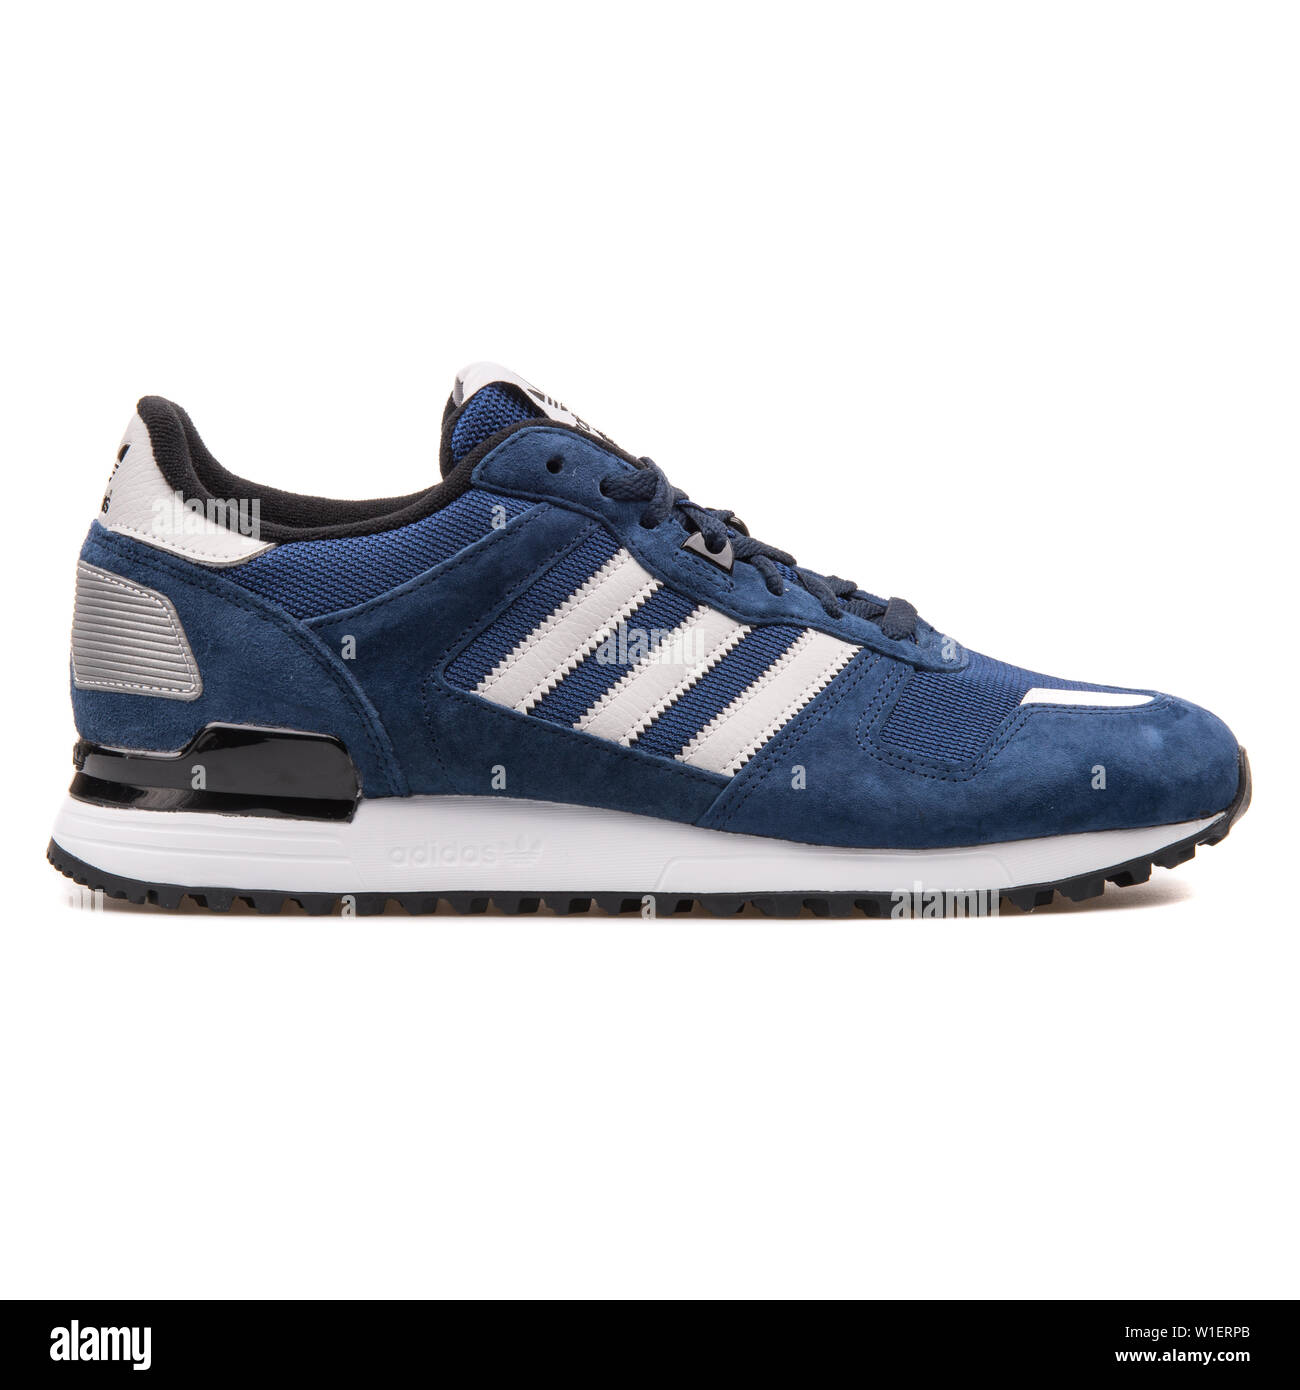 adidas zx 700 navy red